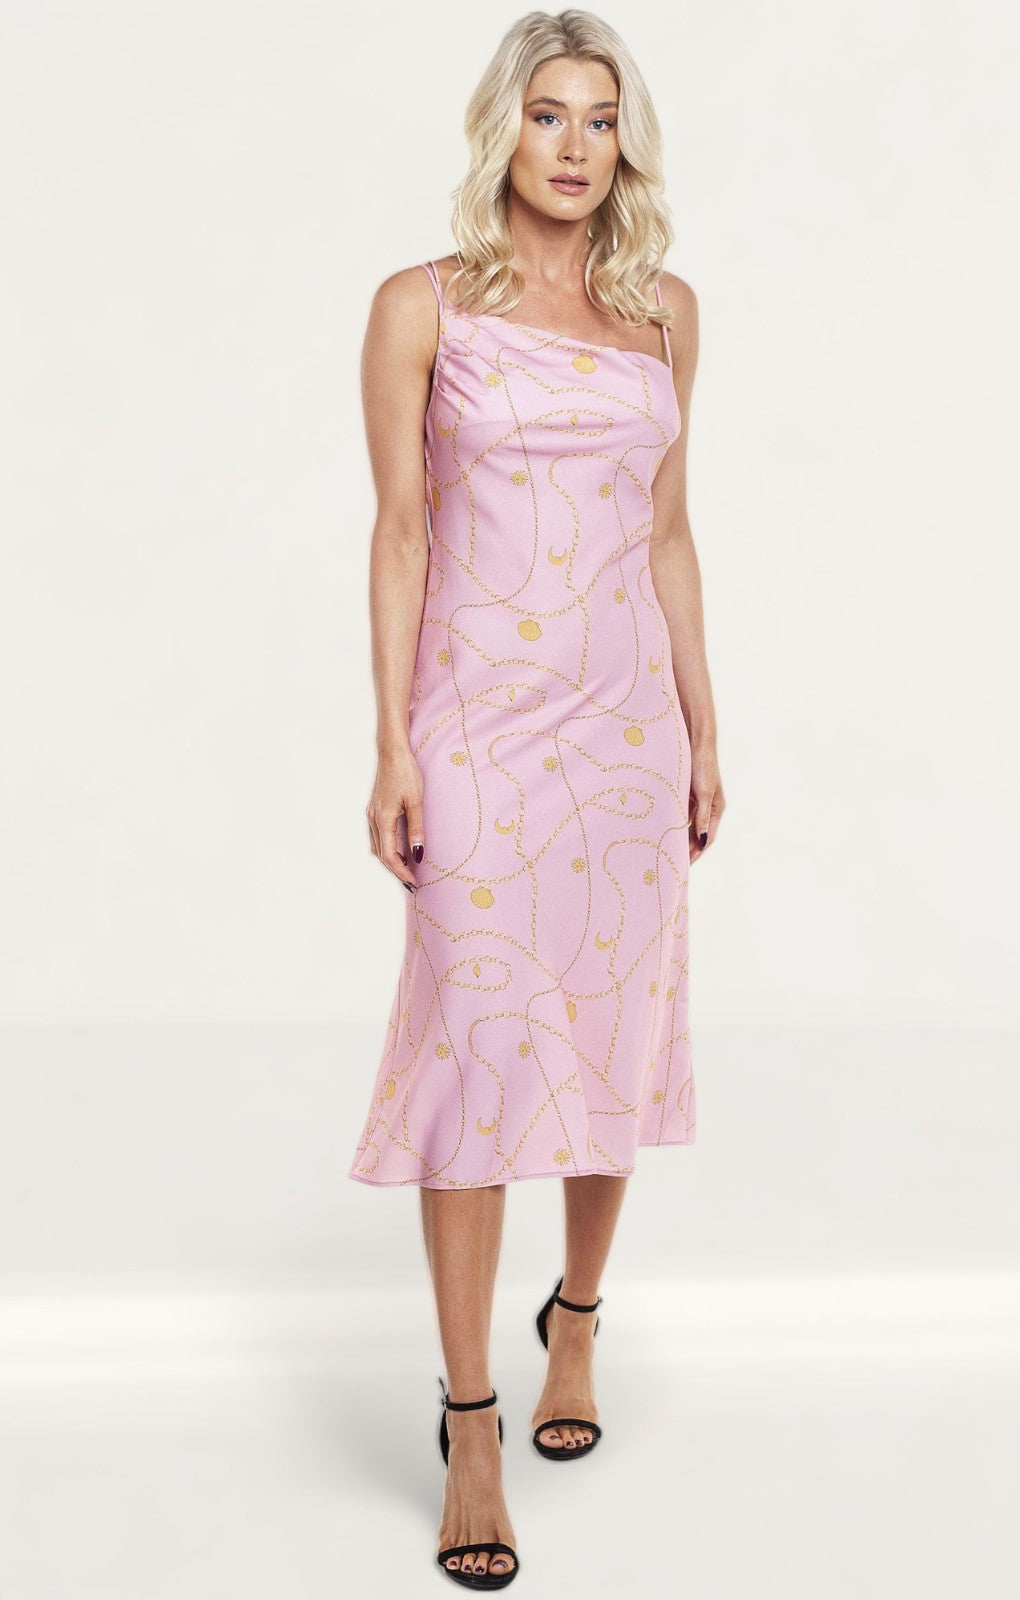 Finders Keepers Chains Dress product image